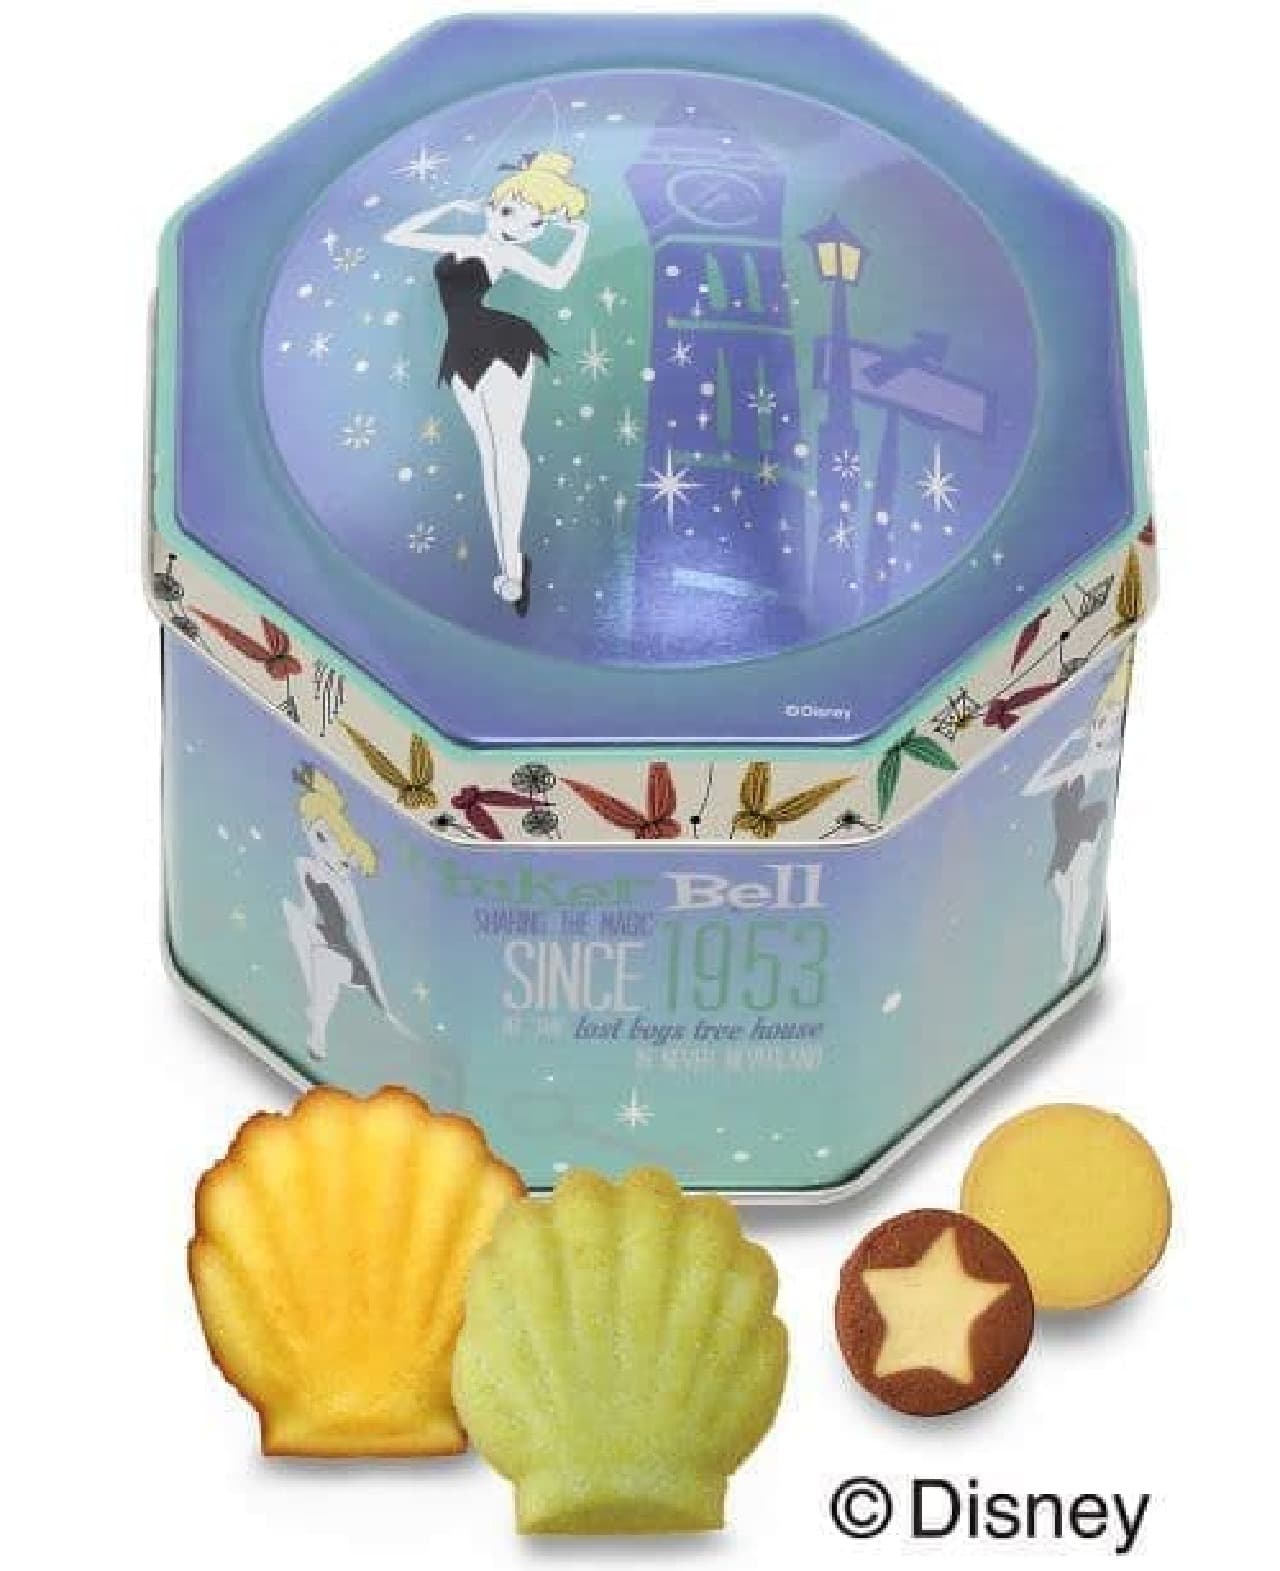 "[Tinker Bell] Gift Can (4 types, 9 pieces)" is a gift can containing madeleine and cookies.